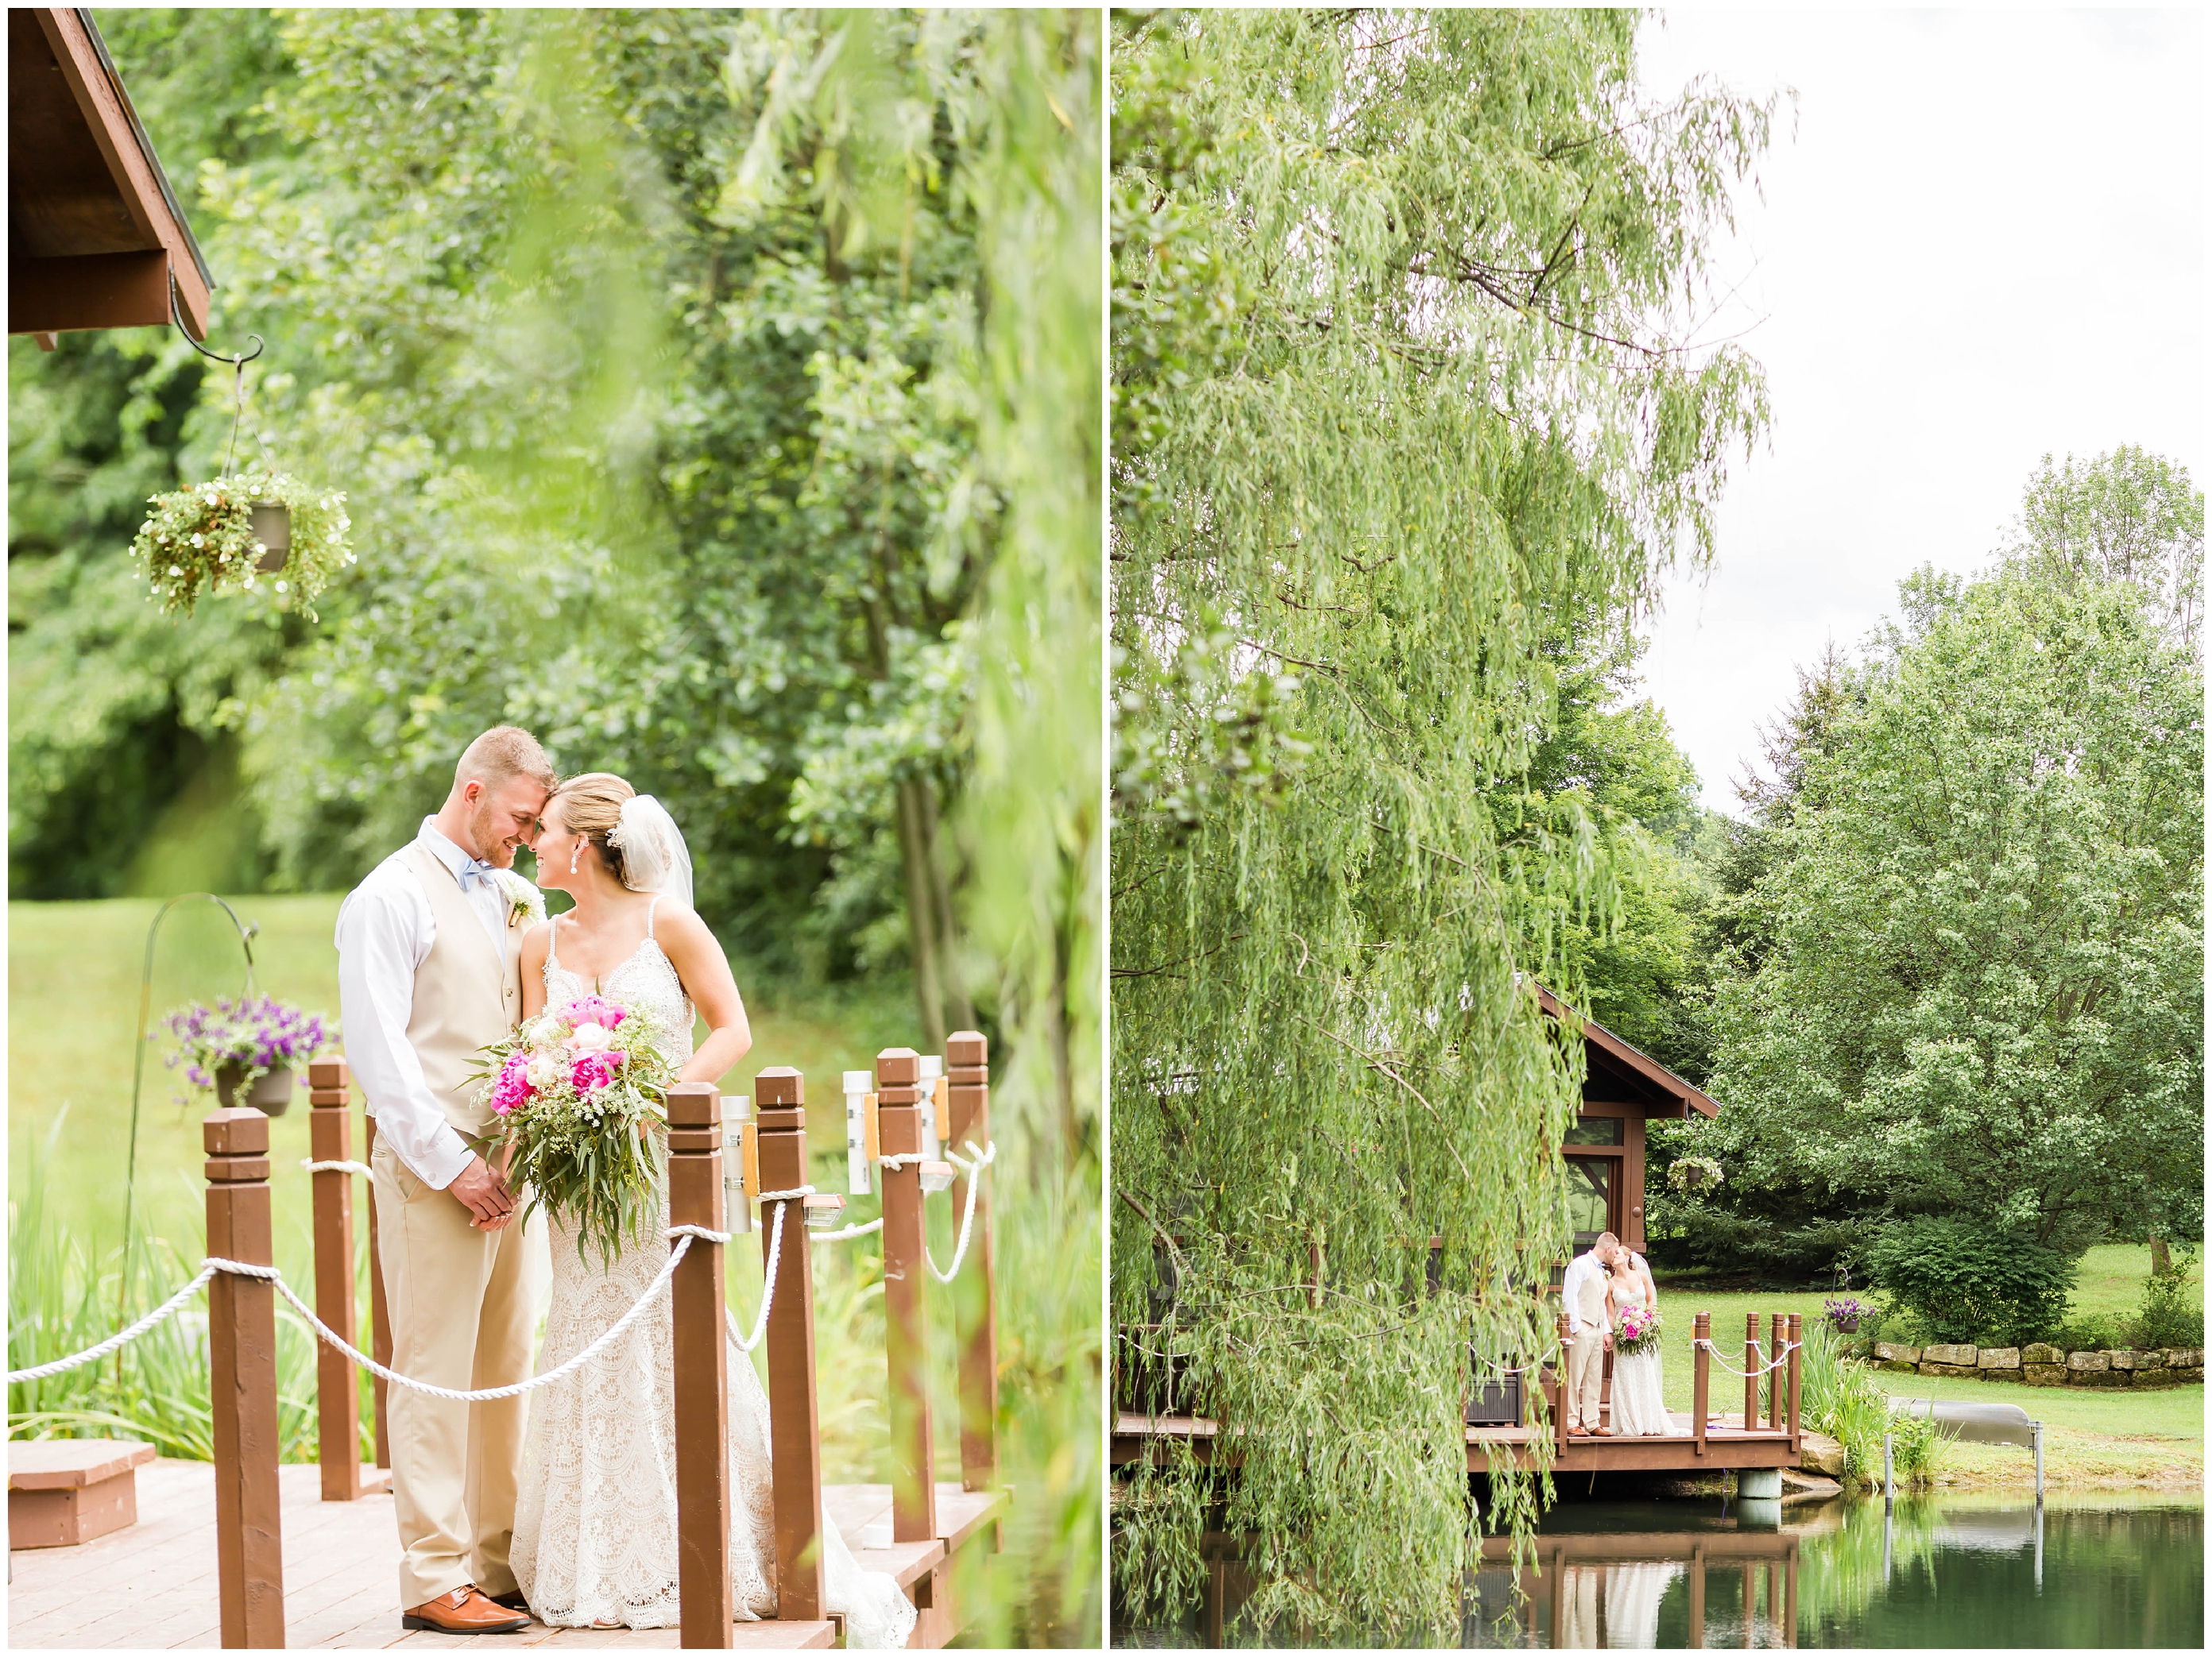 Cleveland Wedding Photographer,Country Cottage and Garden Wedding,big greenery florals,lace wedding dress,loren jackson photography,photographer akron ohio,tan groomsmen suits,